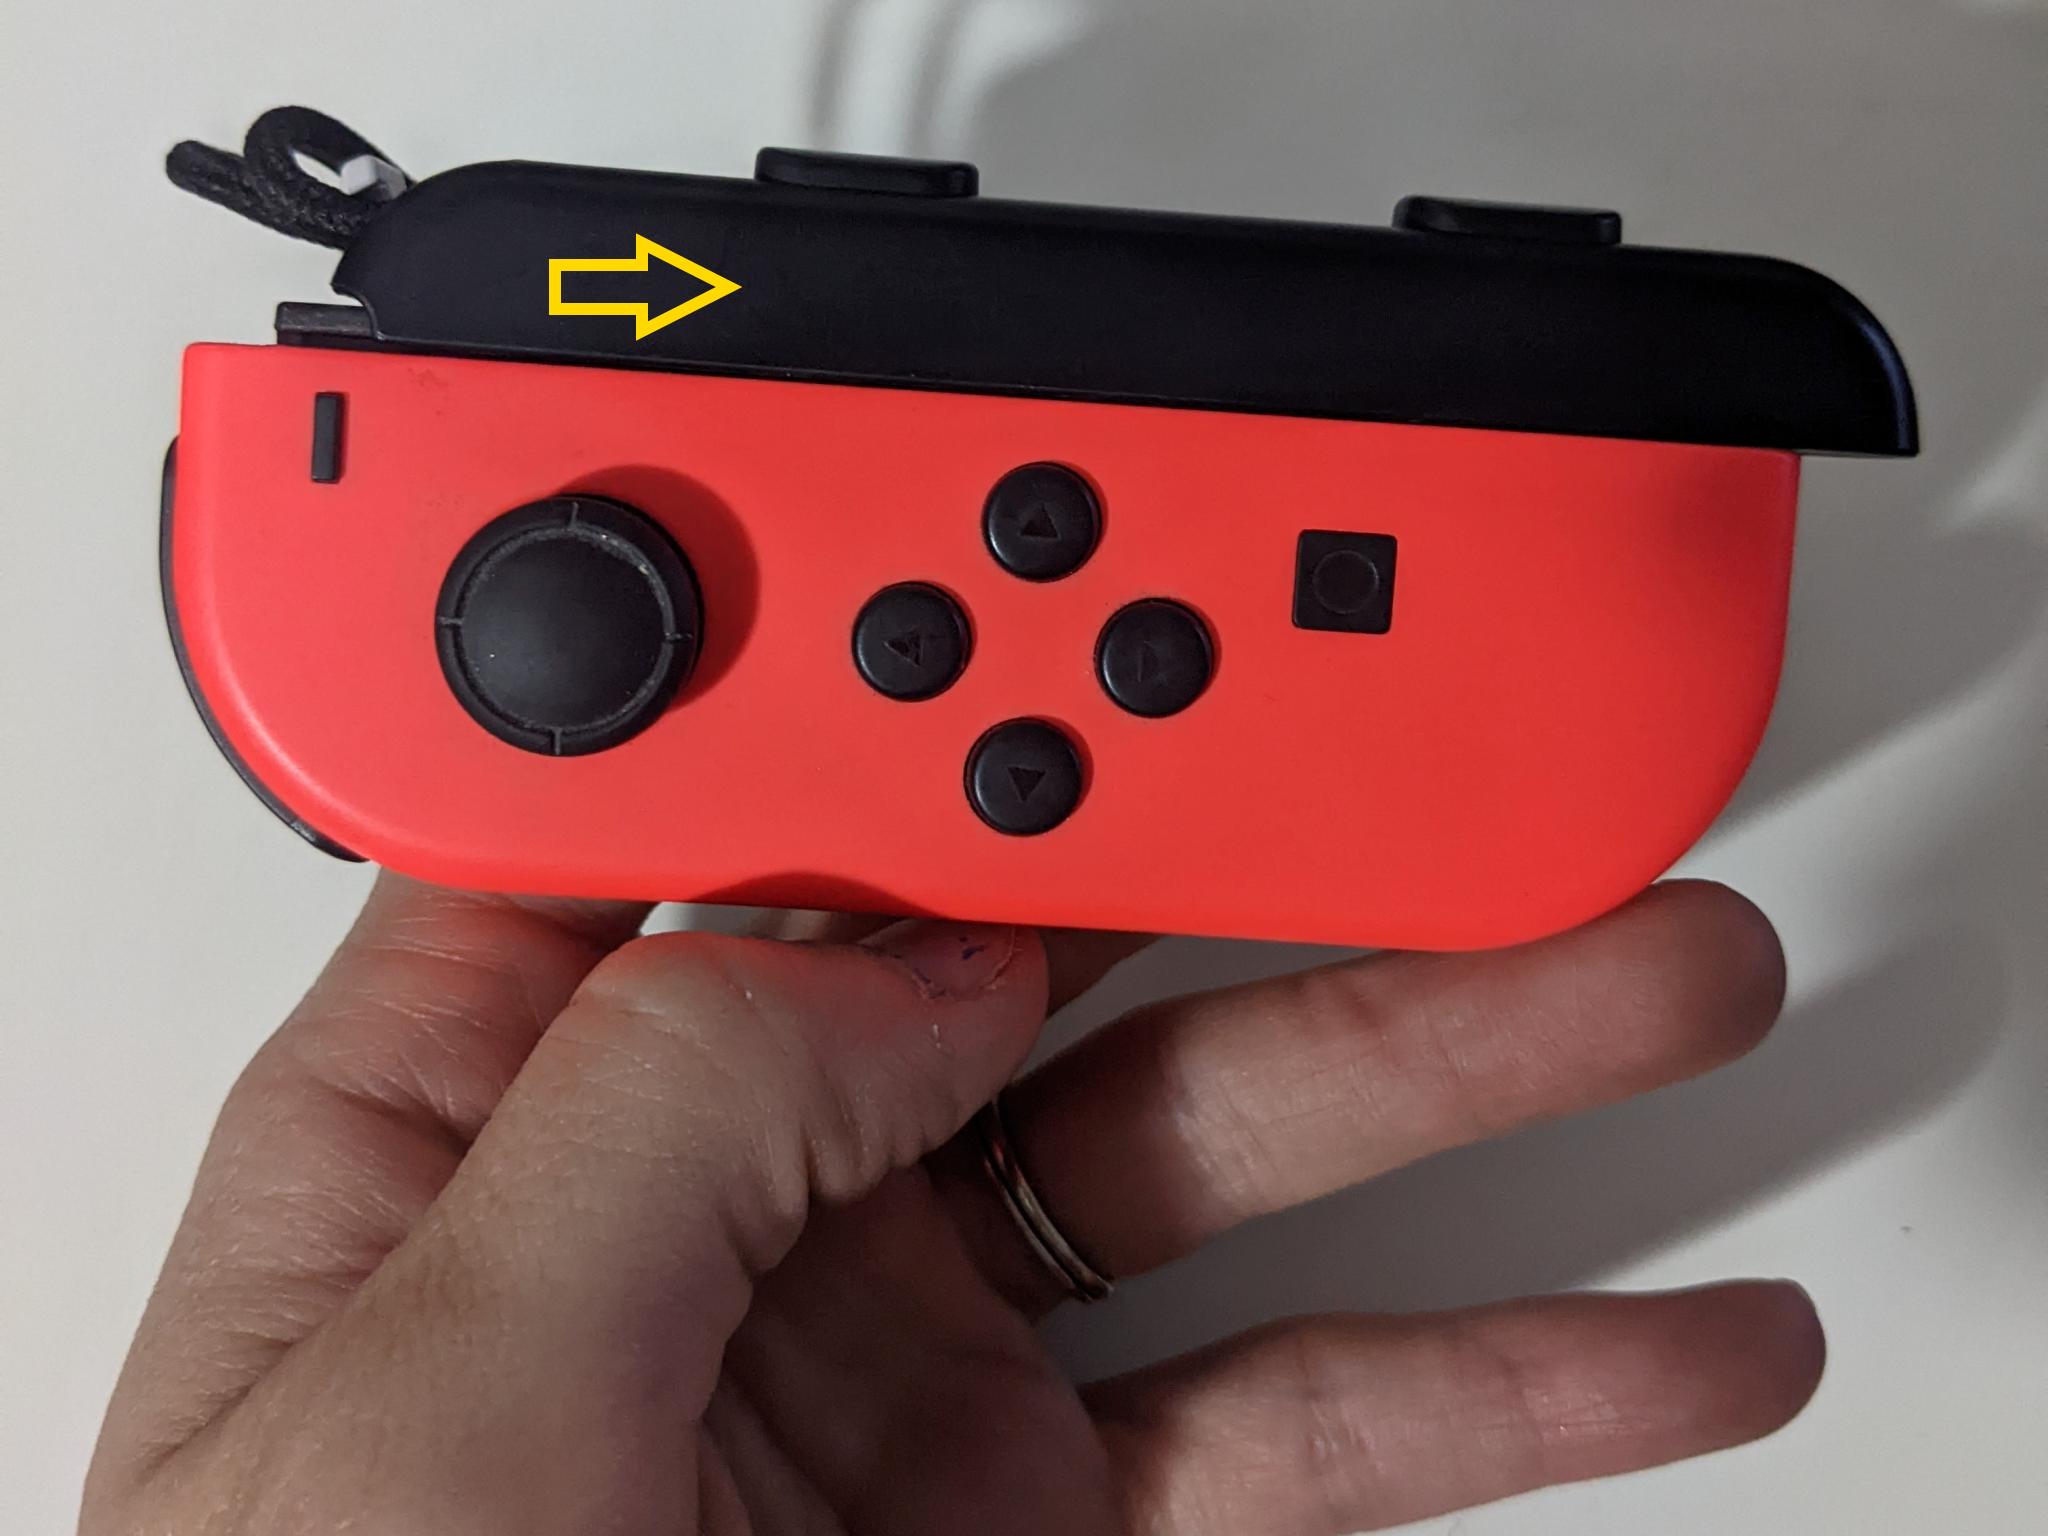 How to remove a stuck Joy-Con strap: Use the other hand to gently slide the strap away from the strap lock and off the Joy-Con